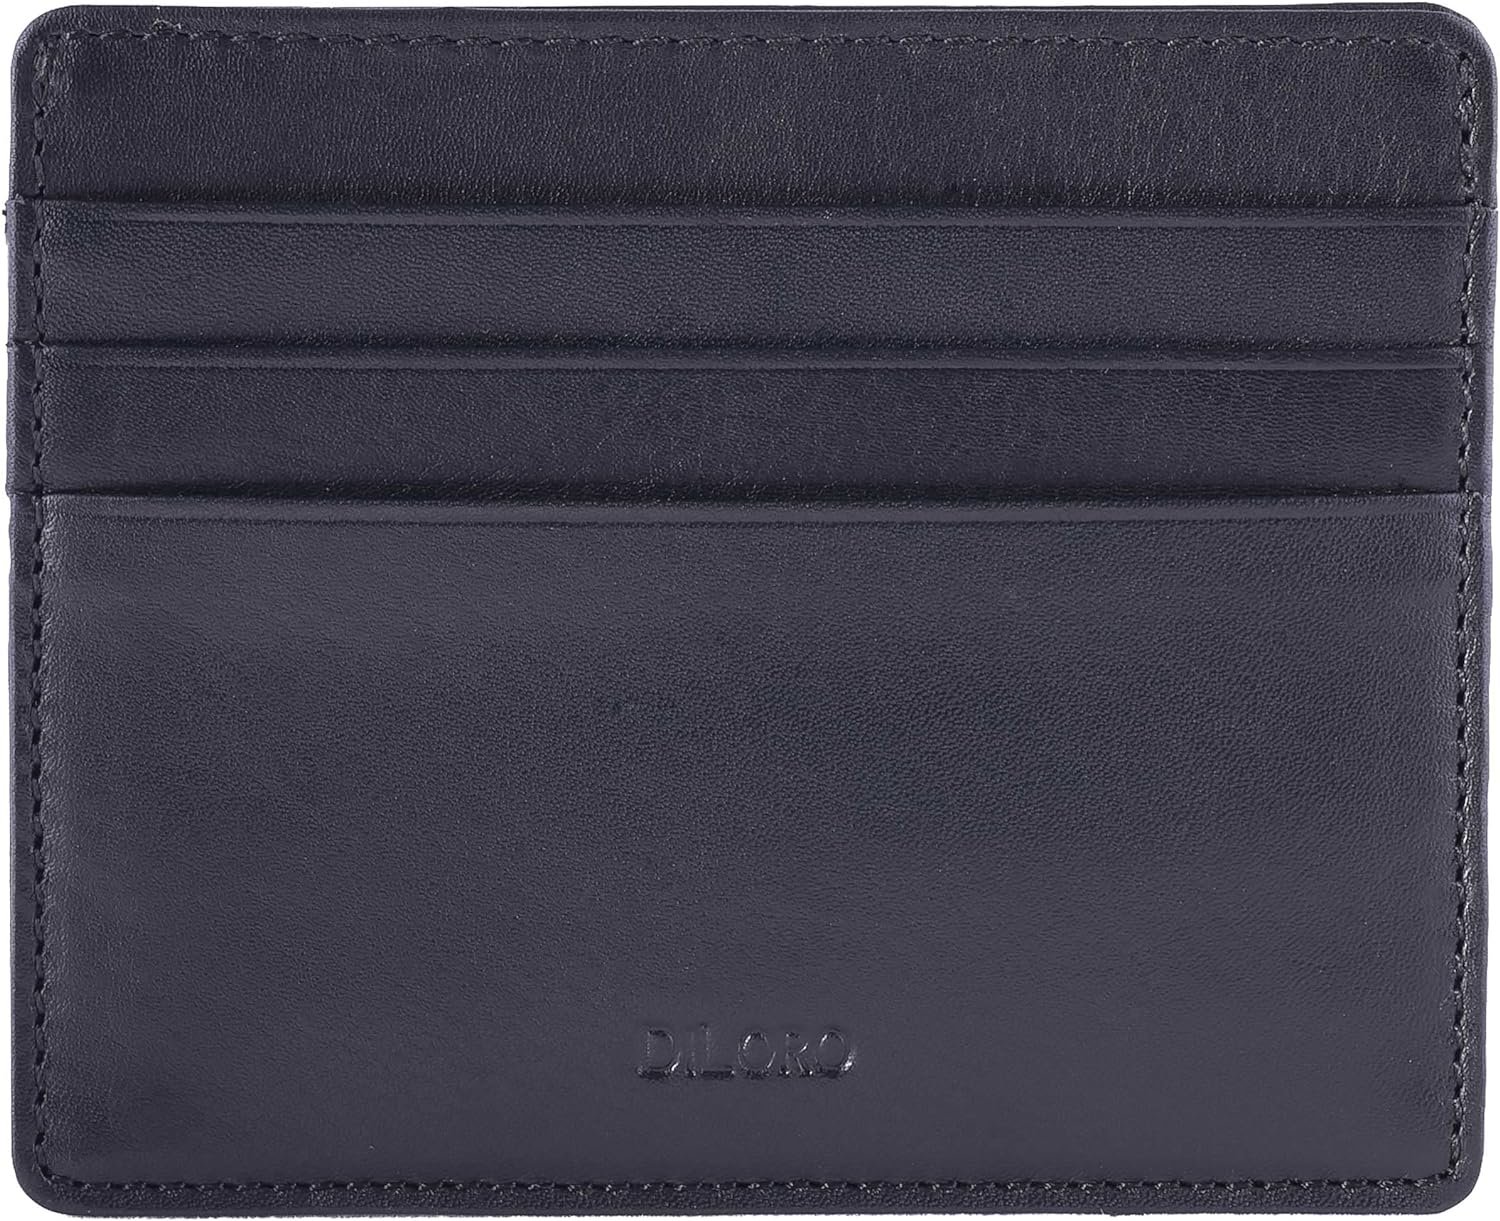 Men’s Leather Travel Card Wallet Review